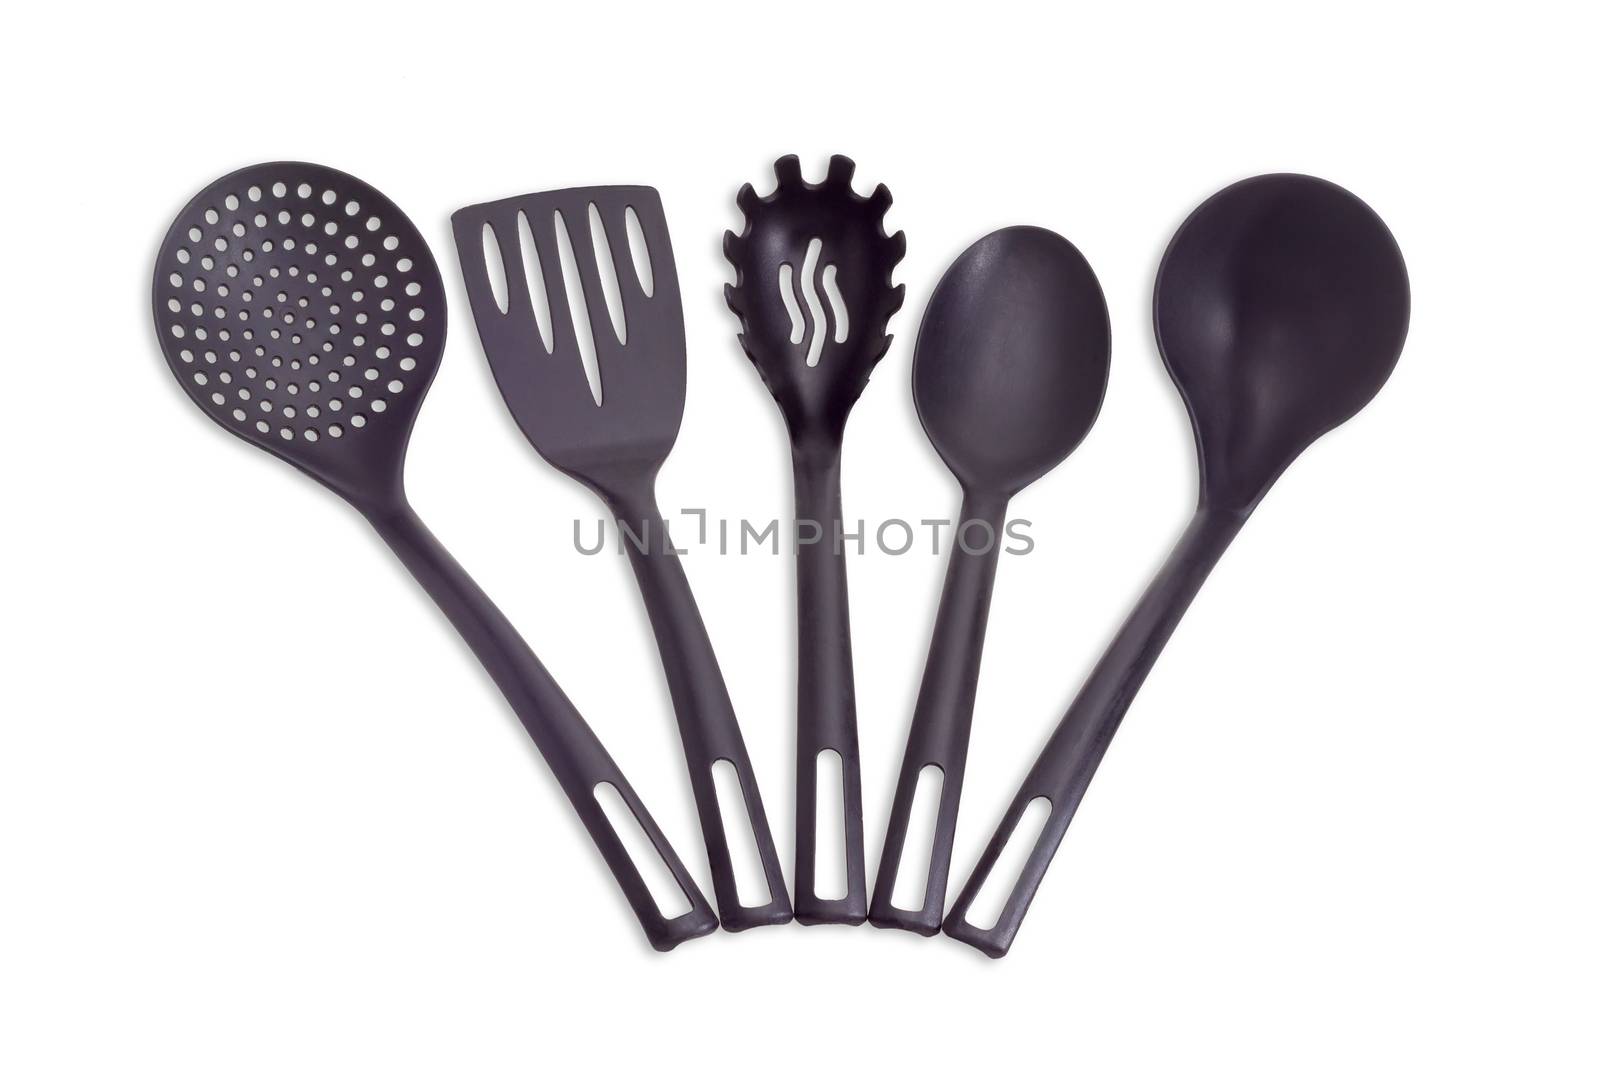 Plastic black cooking utensils on a light background by anmbph